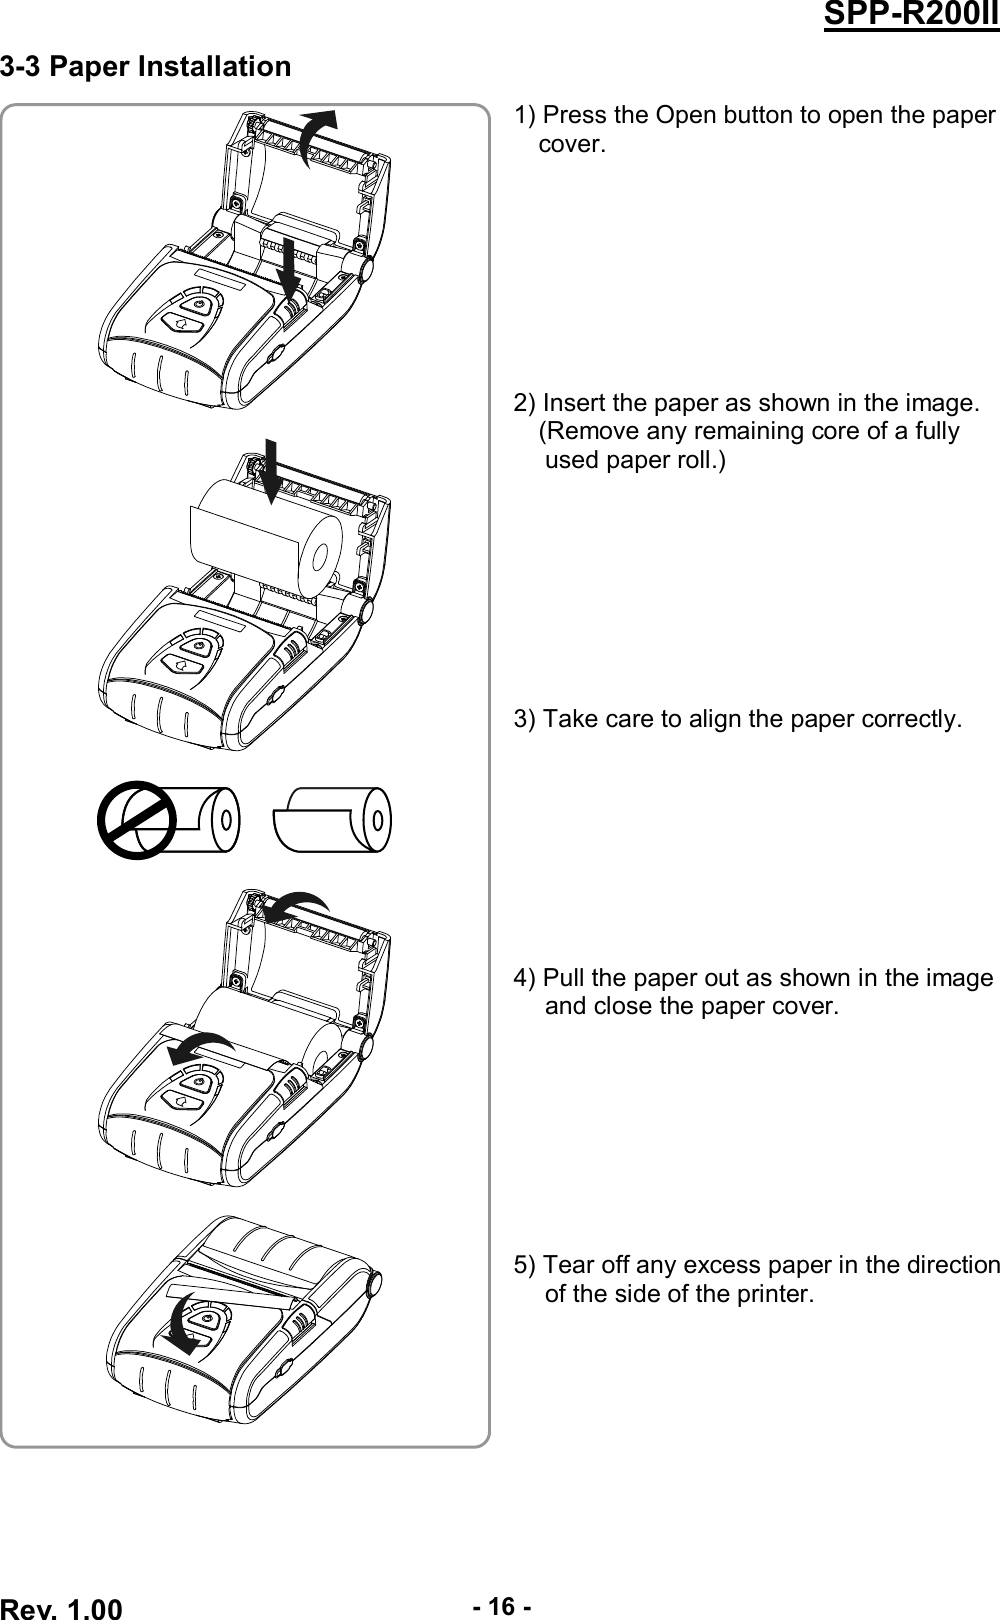  Rev. 1.00 - 16 - SPP-R200II 3-3 Paper Installation  1) Press the Open button to open the paper cover.         2) Insert the paper as shown in the image. (Remove any remaining core of a fully used paper roll.)         3) Take care to align the paper correctly.         4) Pull the paper out as shown in the image and close the paper cover.         5) Tear off any excess paper in the direction of the side of the printer.          